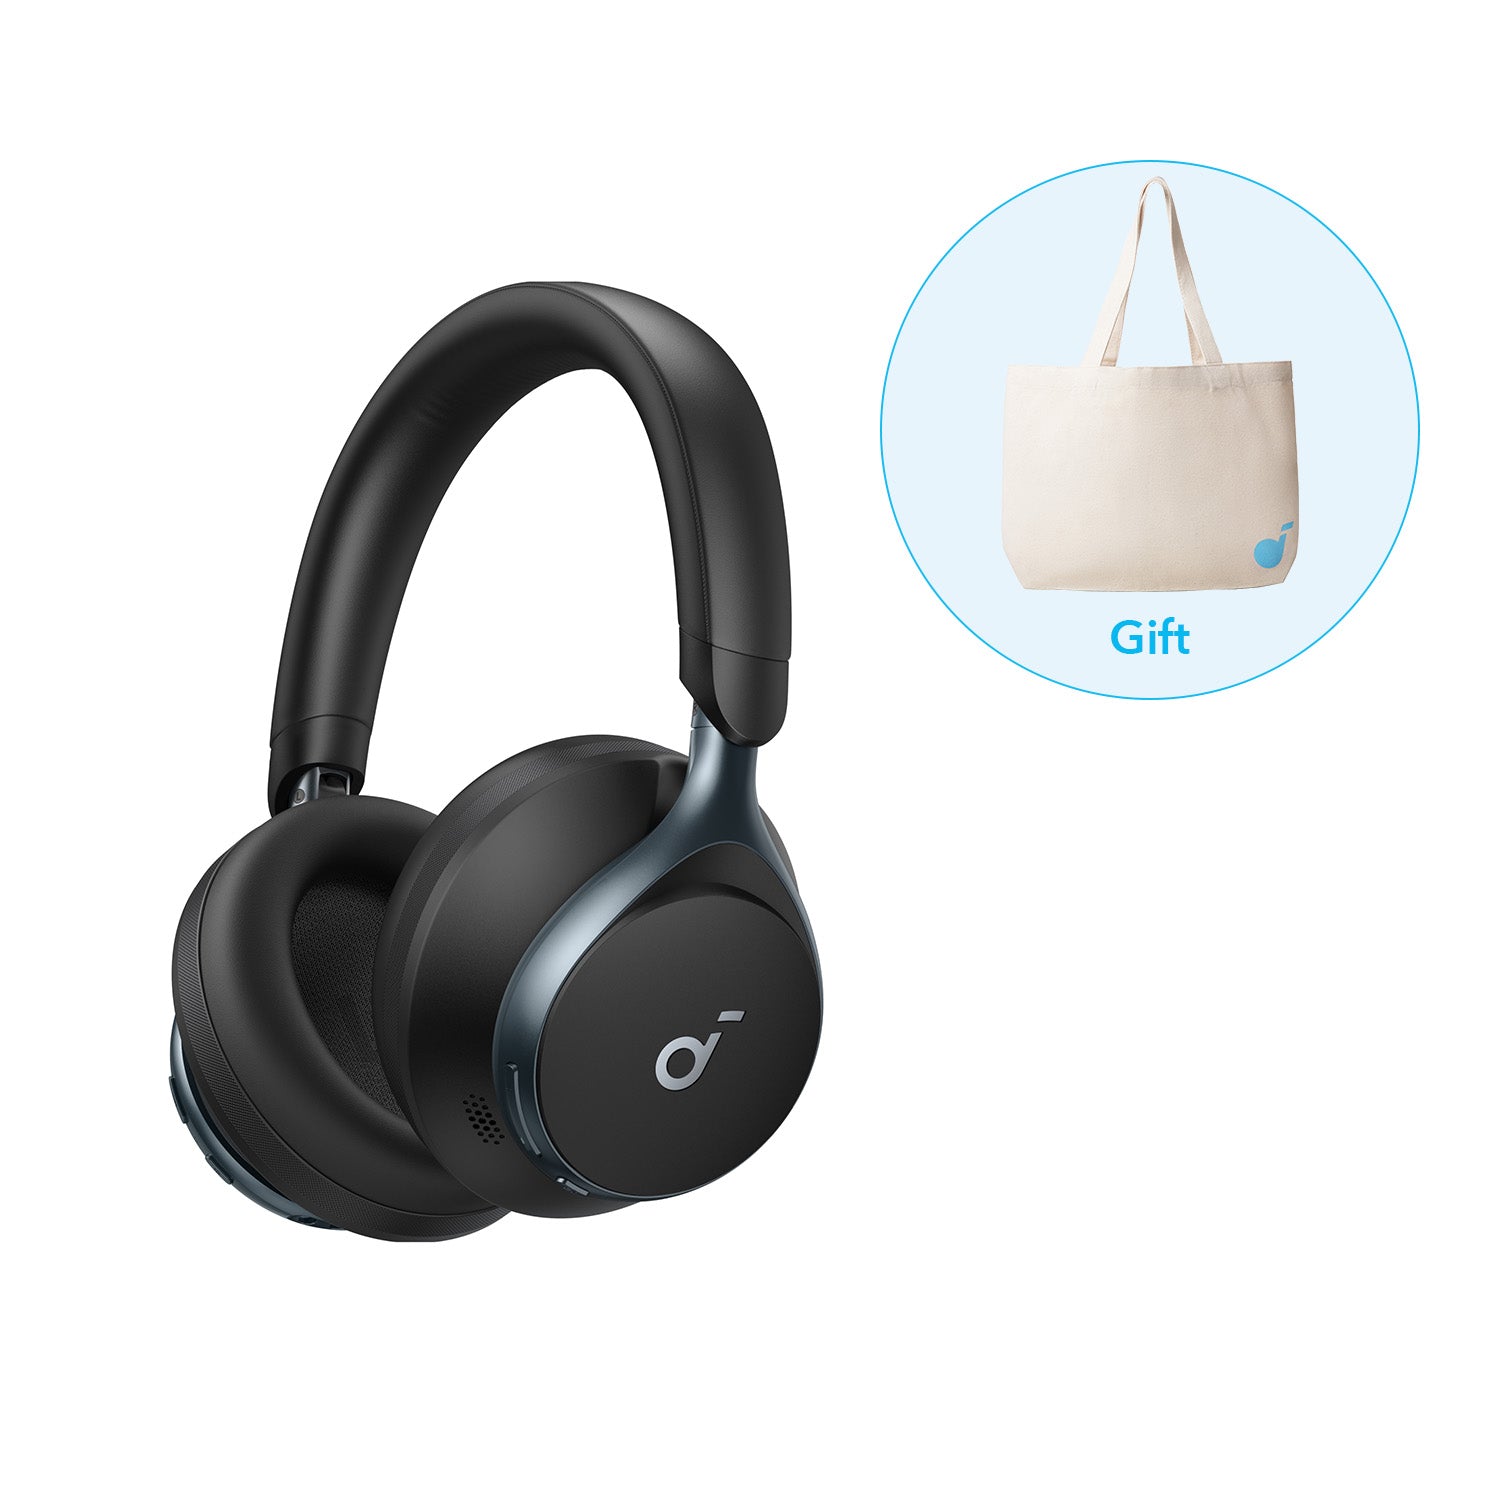 Photos - Headphones Soundcore Space One and Tote Bag Jet Black 